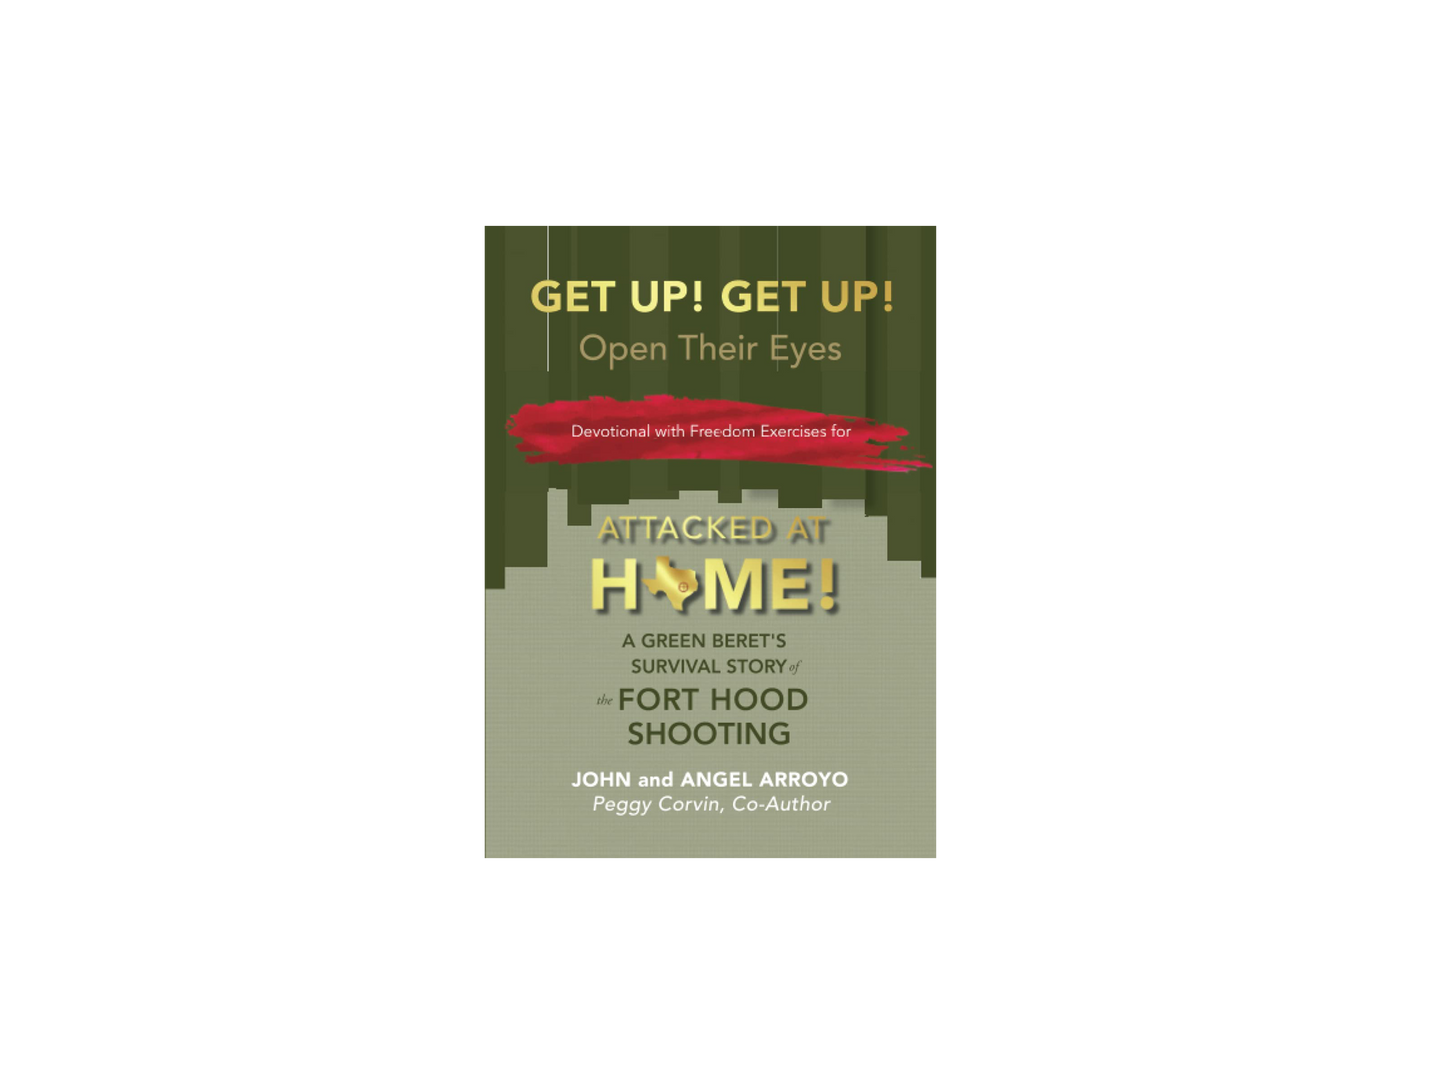 Book - "Get Up! Get Up! Open Their Eyes" - Devotional (Soft Cover / Paperback)